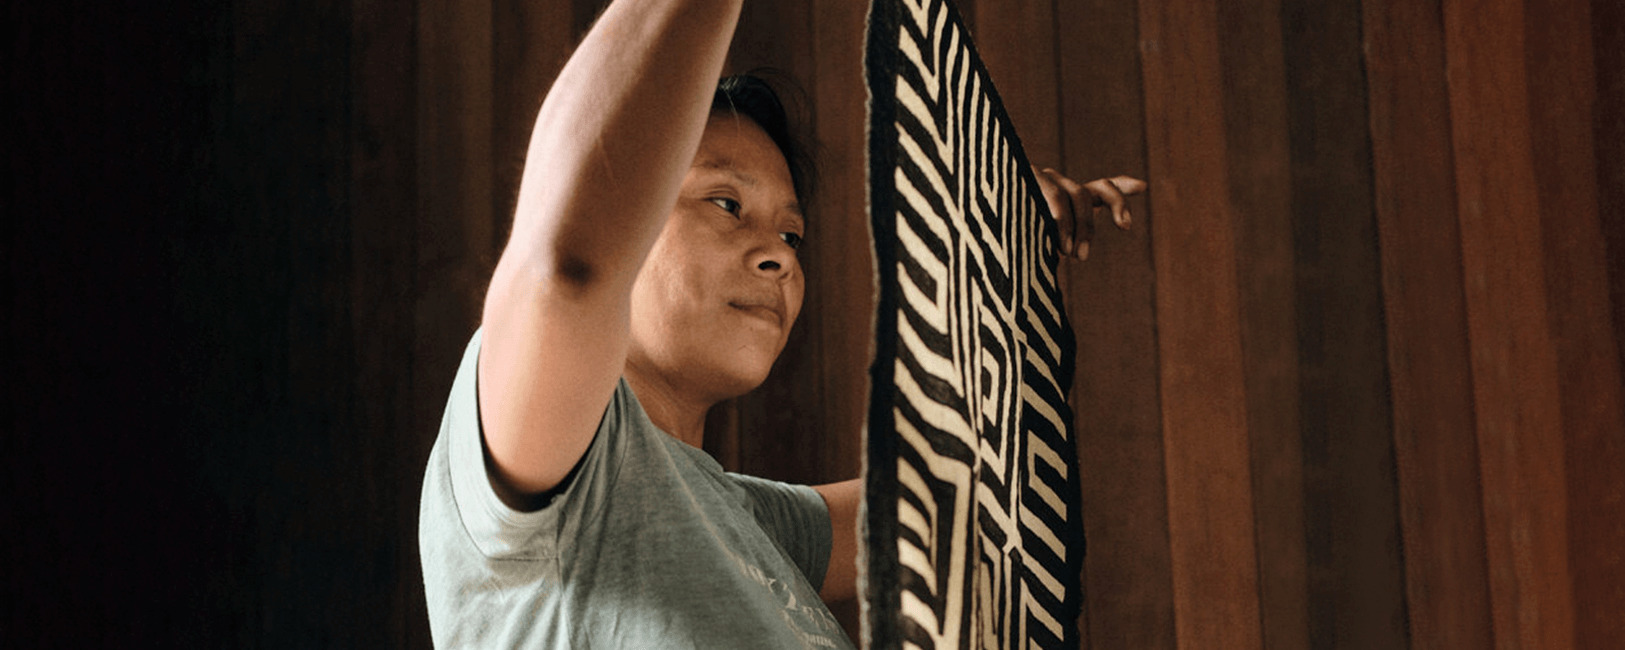 Geometry of an encounter: Art, Ethnobotany and Cooking with the Iskonawa people in the Community of Callería